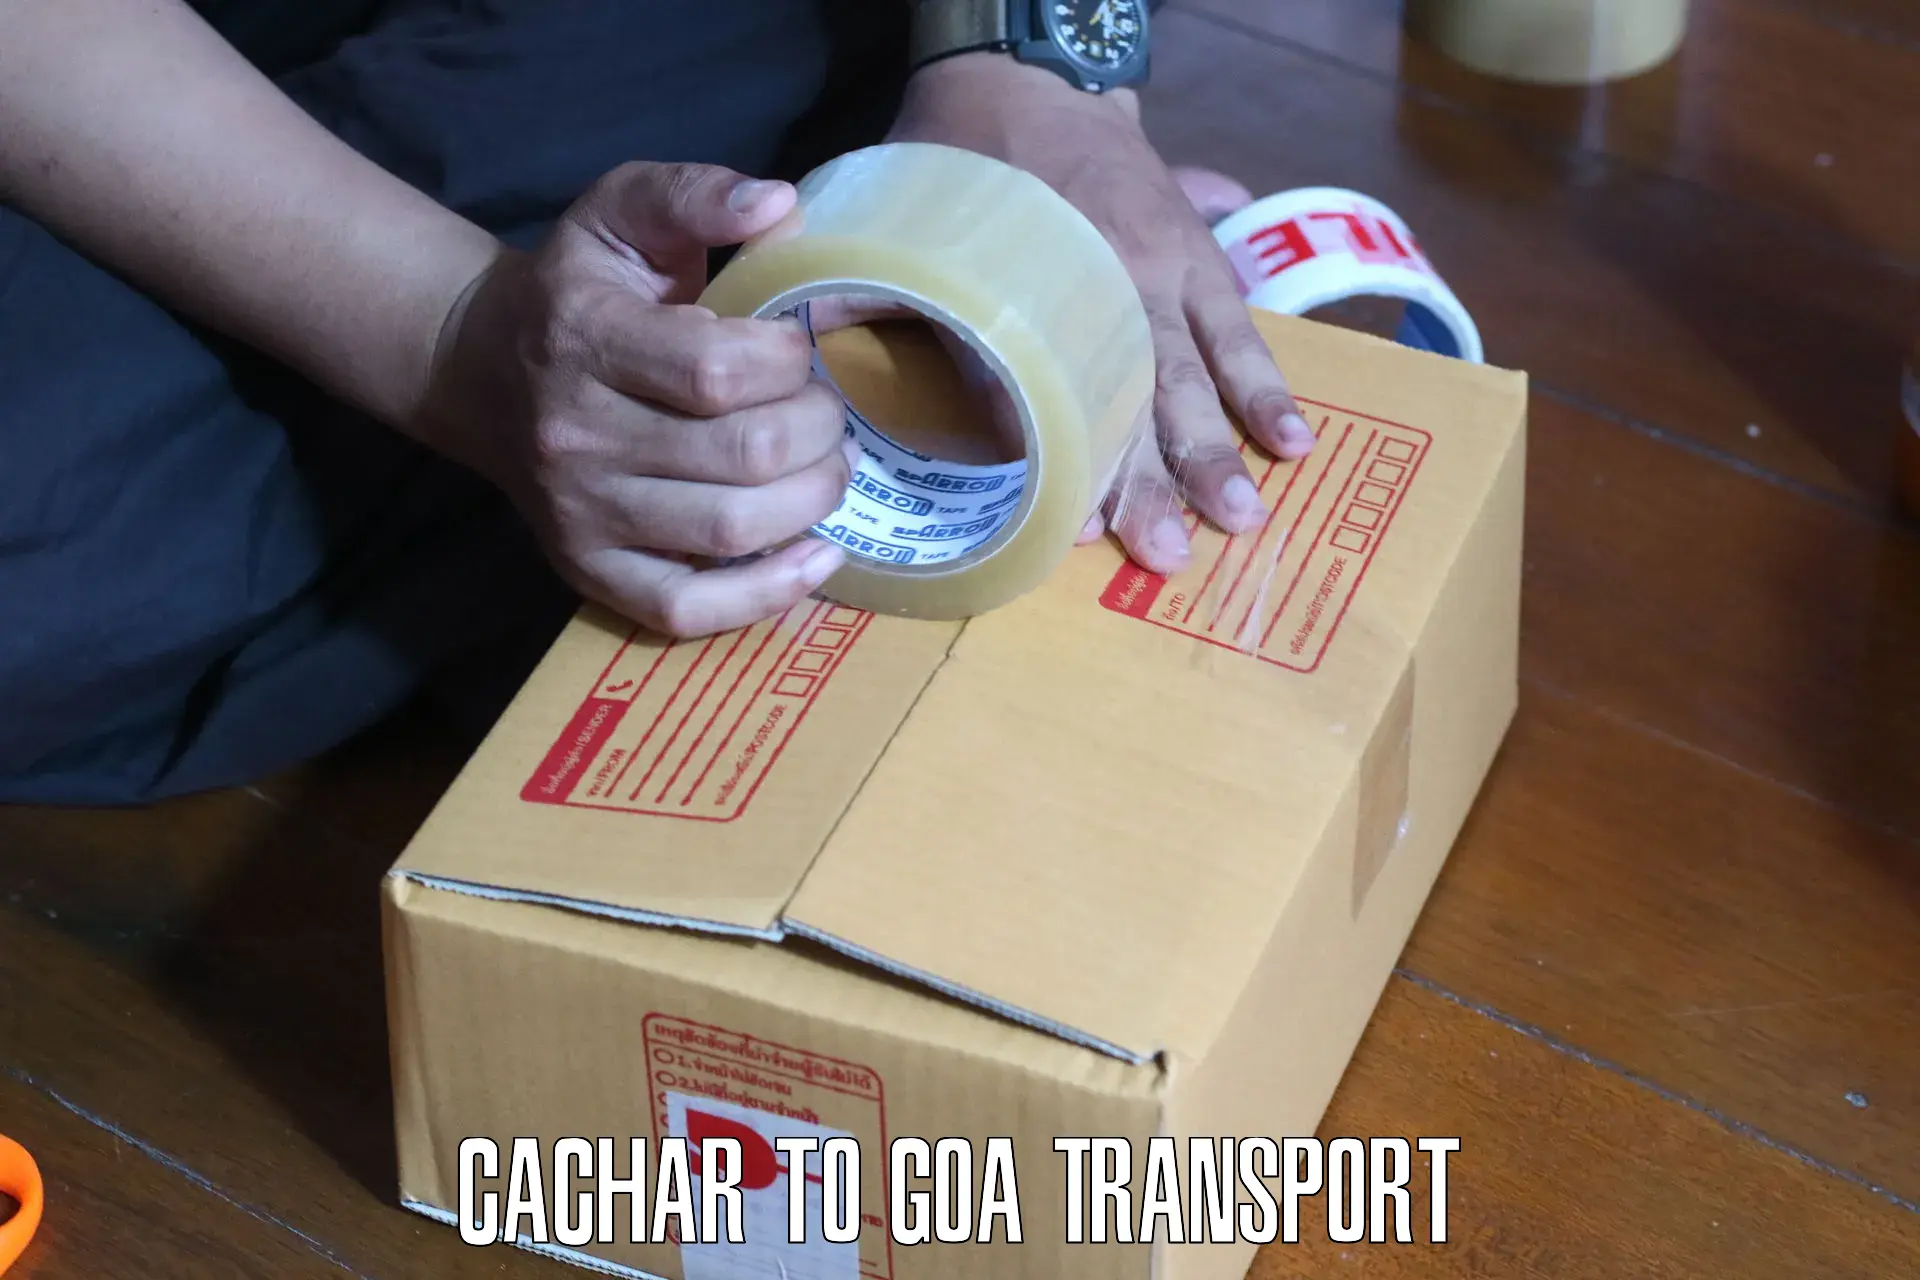 Material transport services Cachar to Panaji